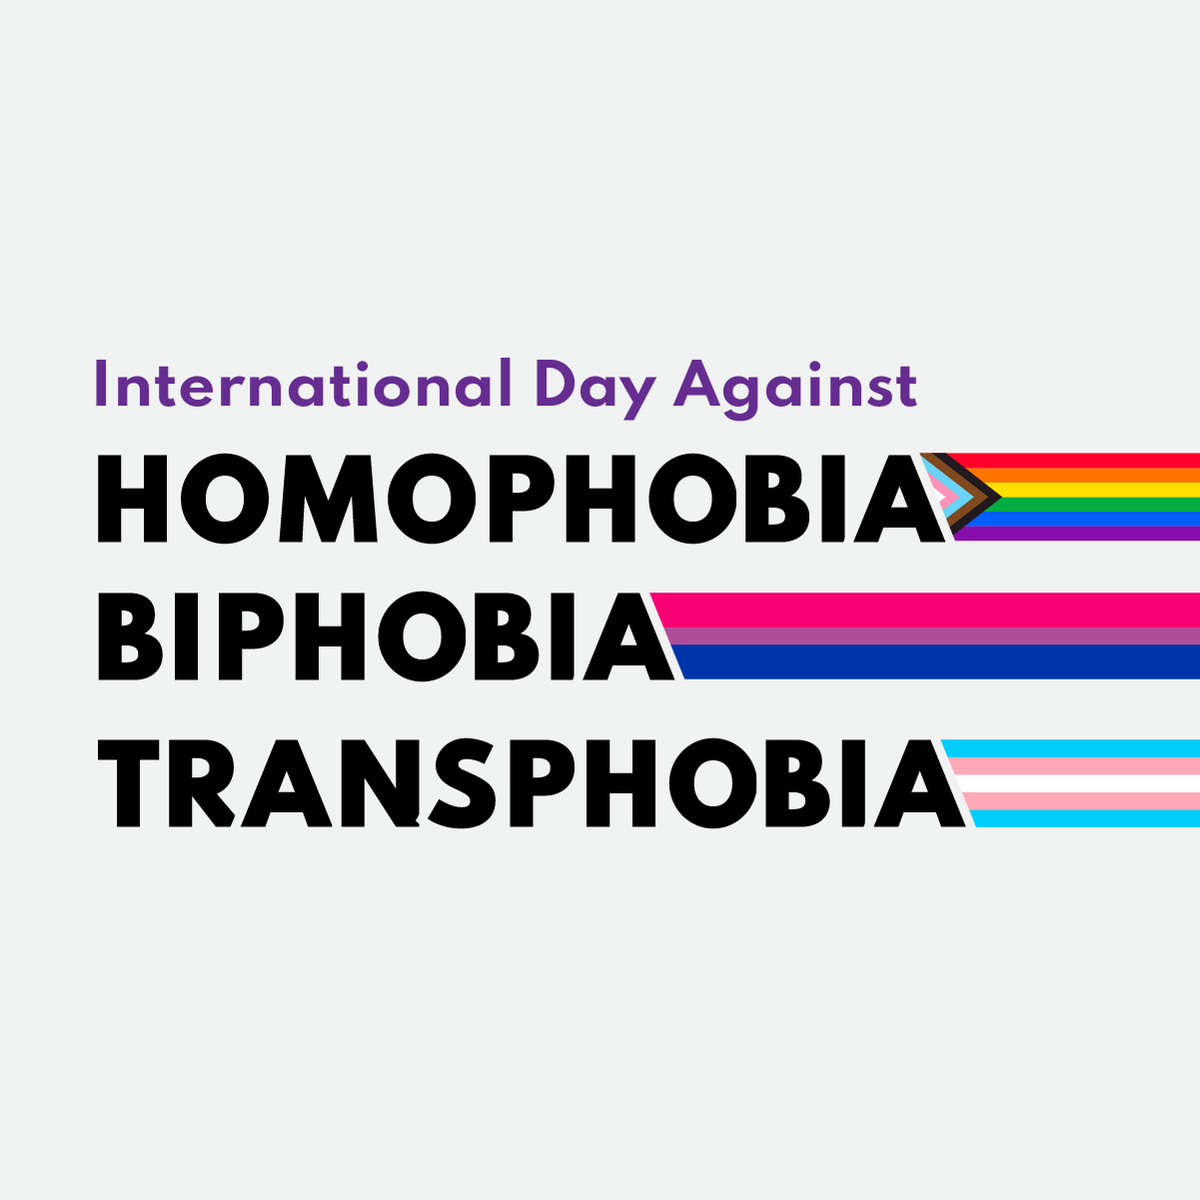 Today is the International Day Against Homophobia, Biphobia, and Transphobia. We recognize the courage and resilience of the LGBTQ2 community who have fought for equity. All forms of discrimination and violence have no place in Canada.